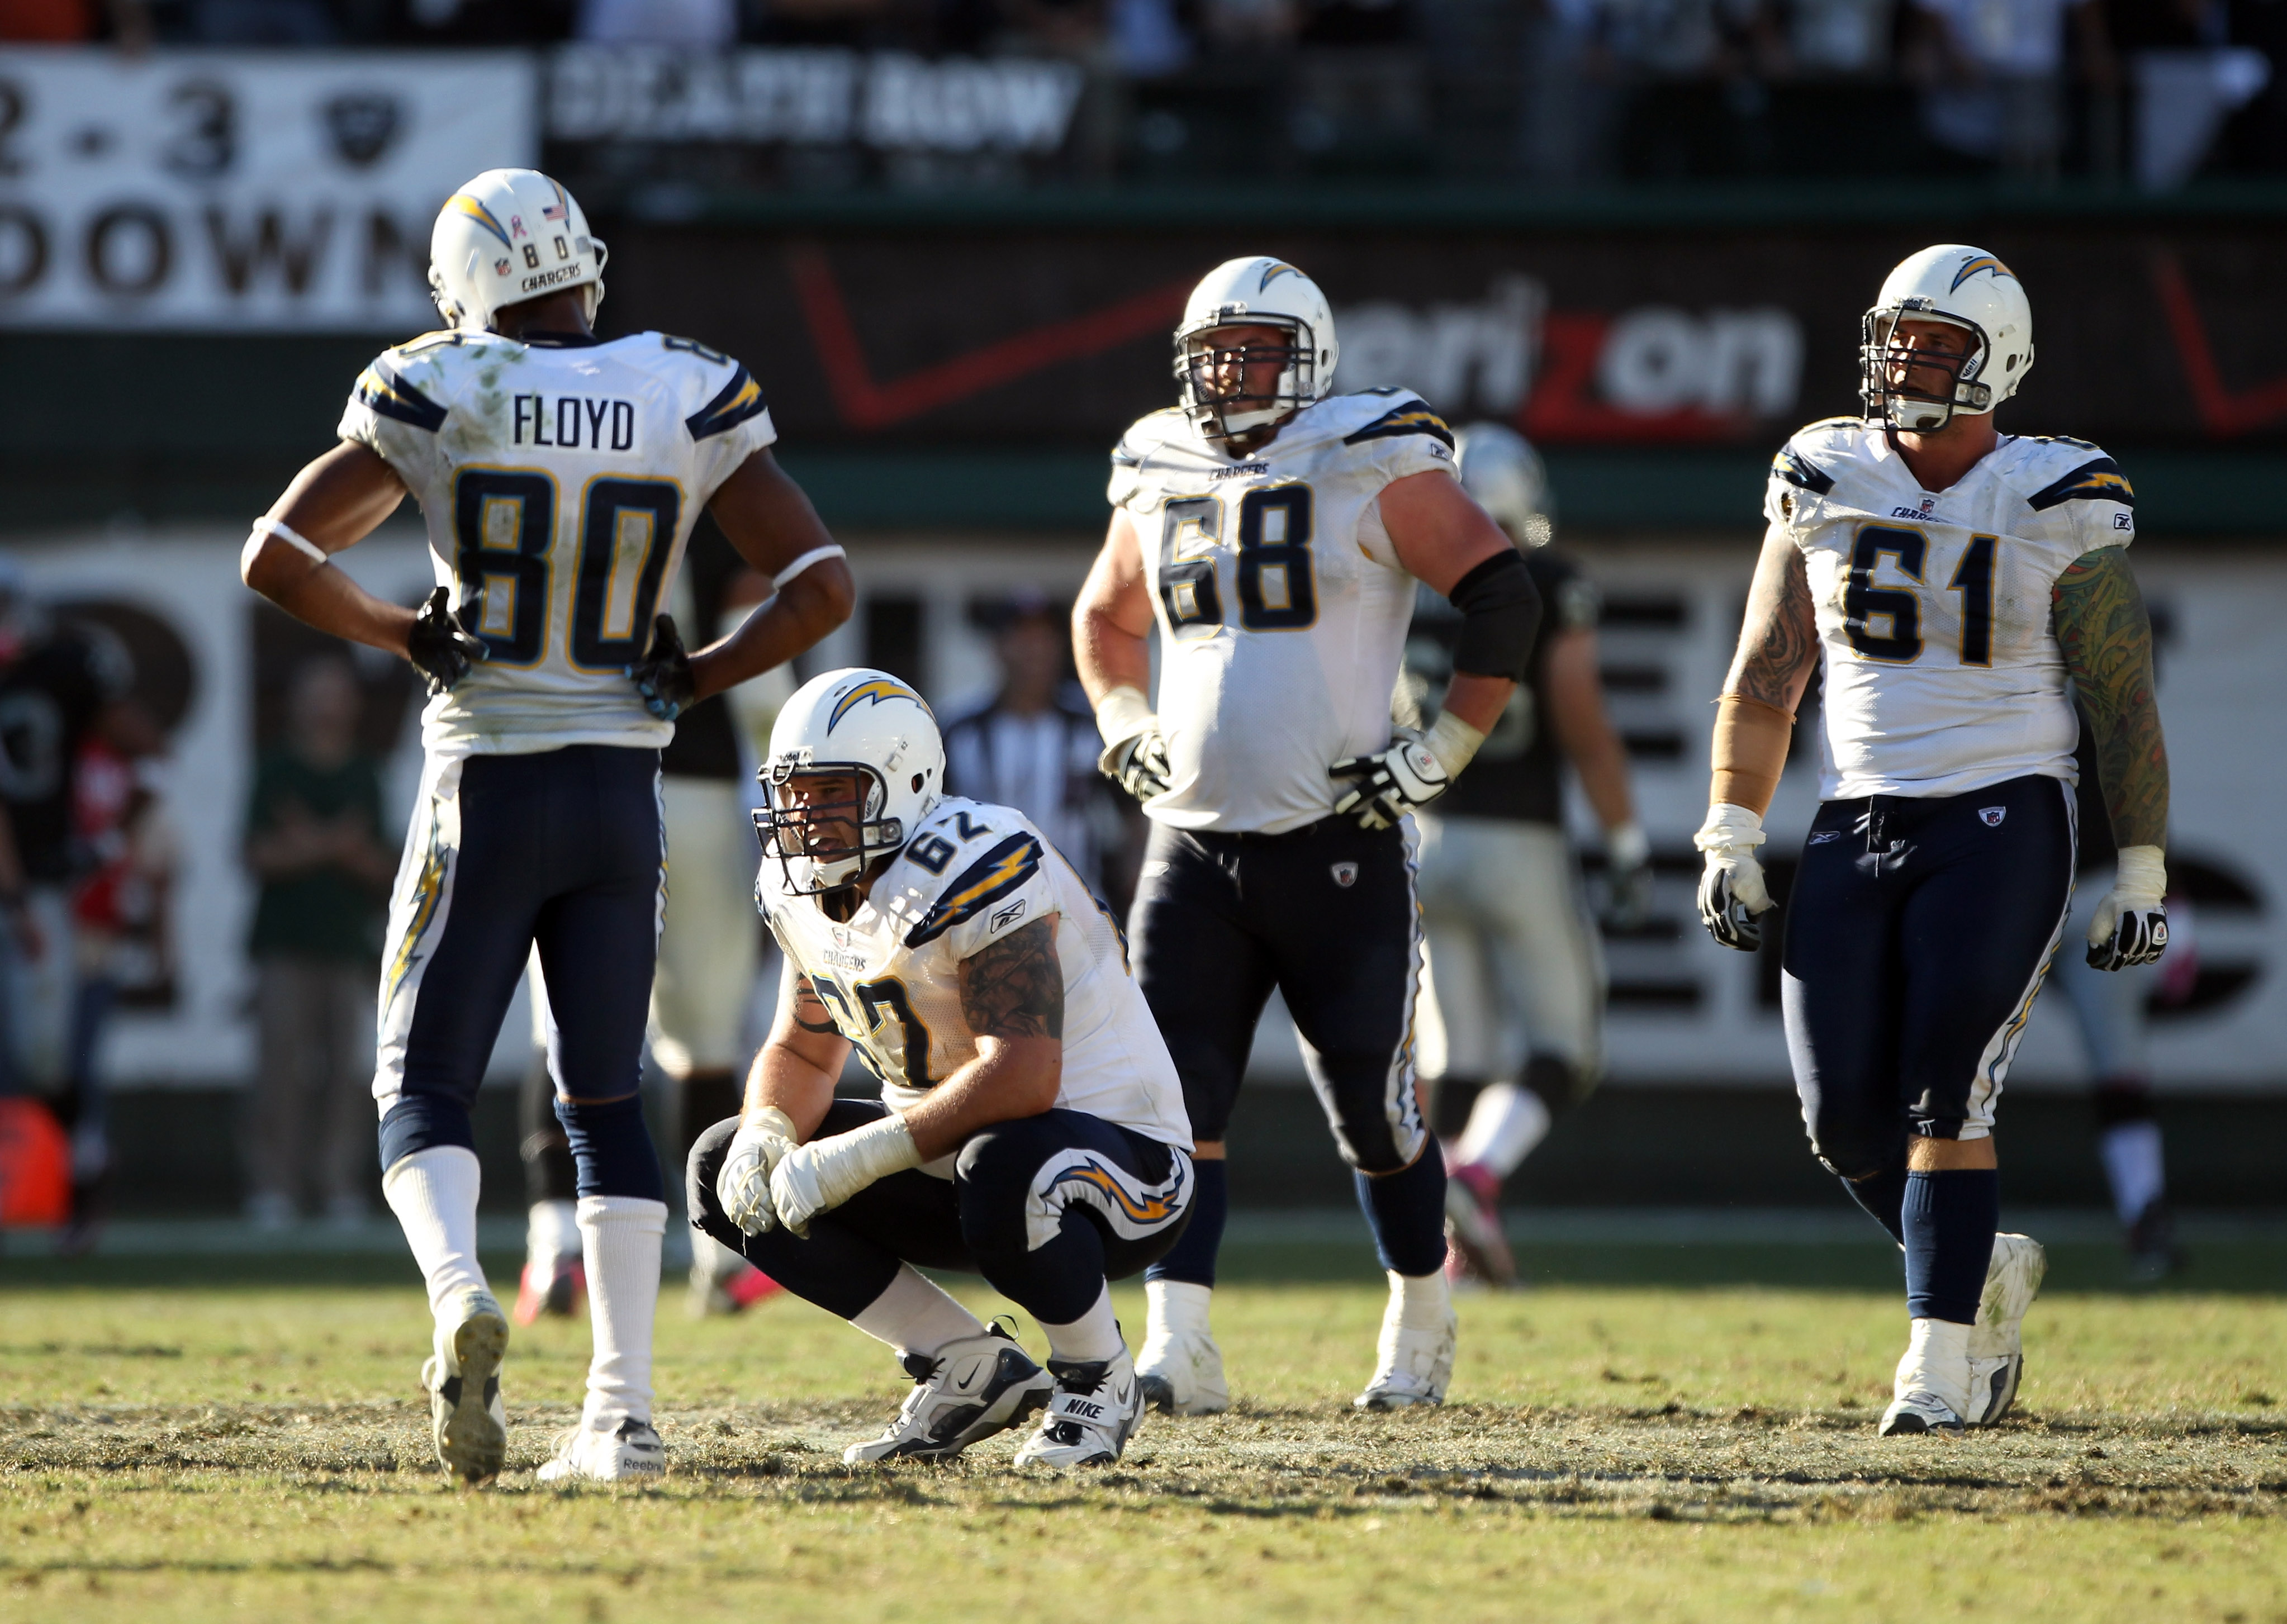 OAKLAND, CA - OCTOBER 10:   Malcom Floyd #80, Brandyn Dombrowski #62, Kris Dielman #68 and Nick Hardwick #61 of the San Diego Chargers react after Tyvon Branch #33 of the Oakland Raiders picked up a fumble and returned it for a touchdwon in the fourth qua